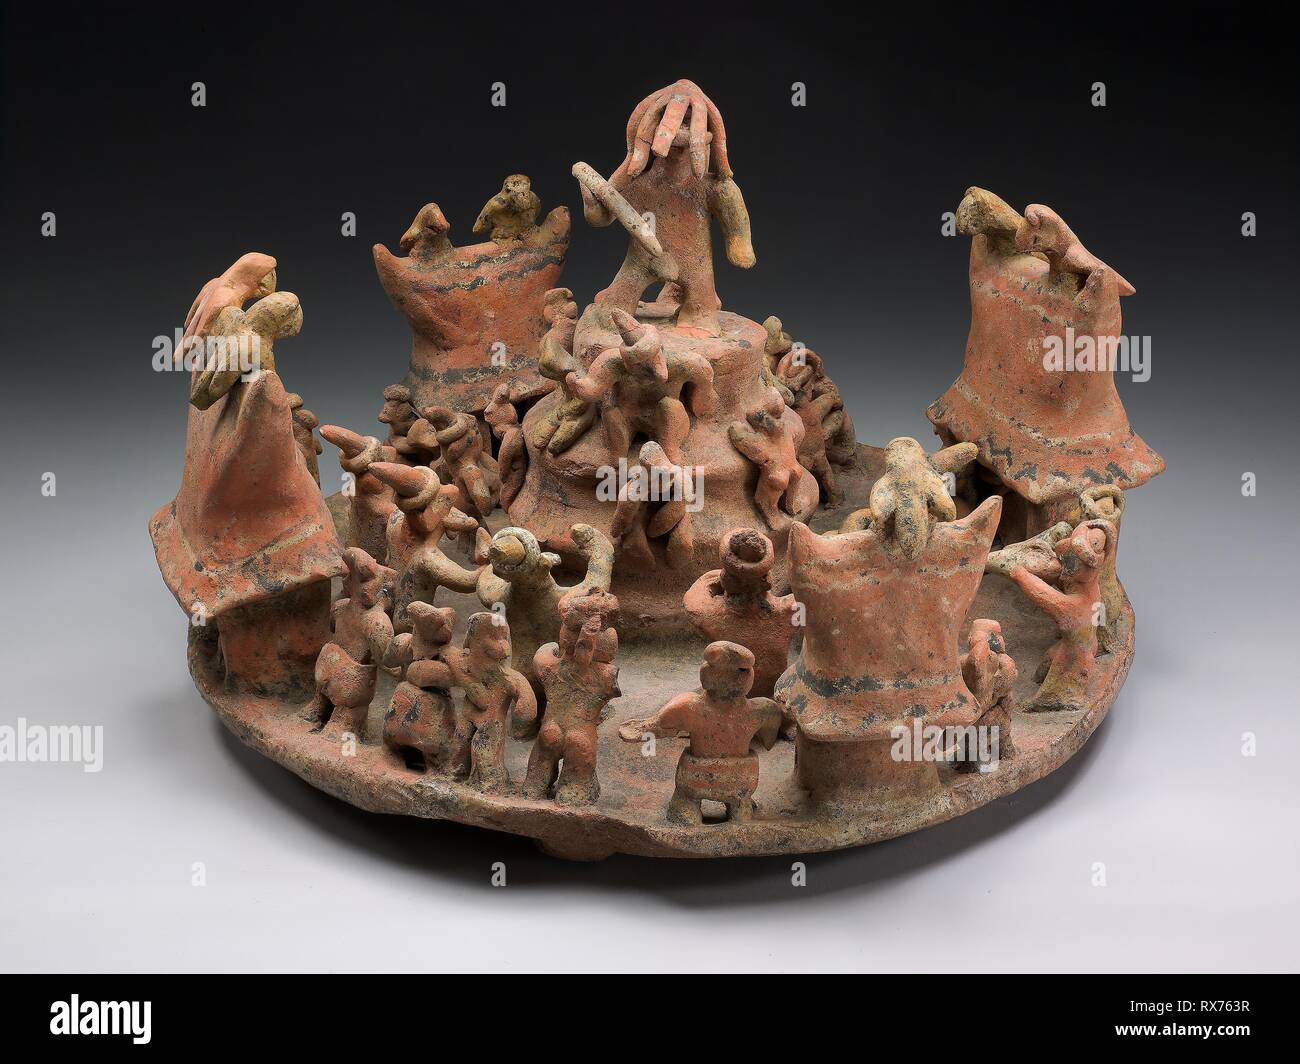 Model Depicting a Ritual Center. Nayarit; Ixtlán del Río, Nayarit, Mexico. Date: 100 AD-800 AD. Dimensions: 33 × 47 cm (13 × 18 1/2 in.). Ceramic and pigment. Origin: Nayarit state. Museum: The Chicago Art Institute. Stock Photo